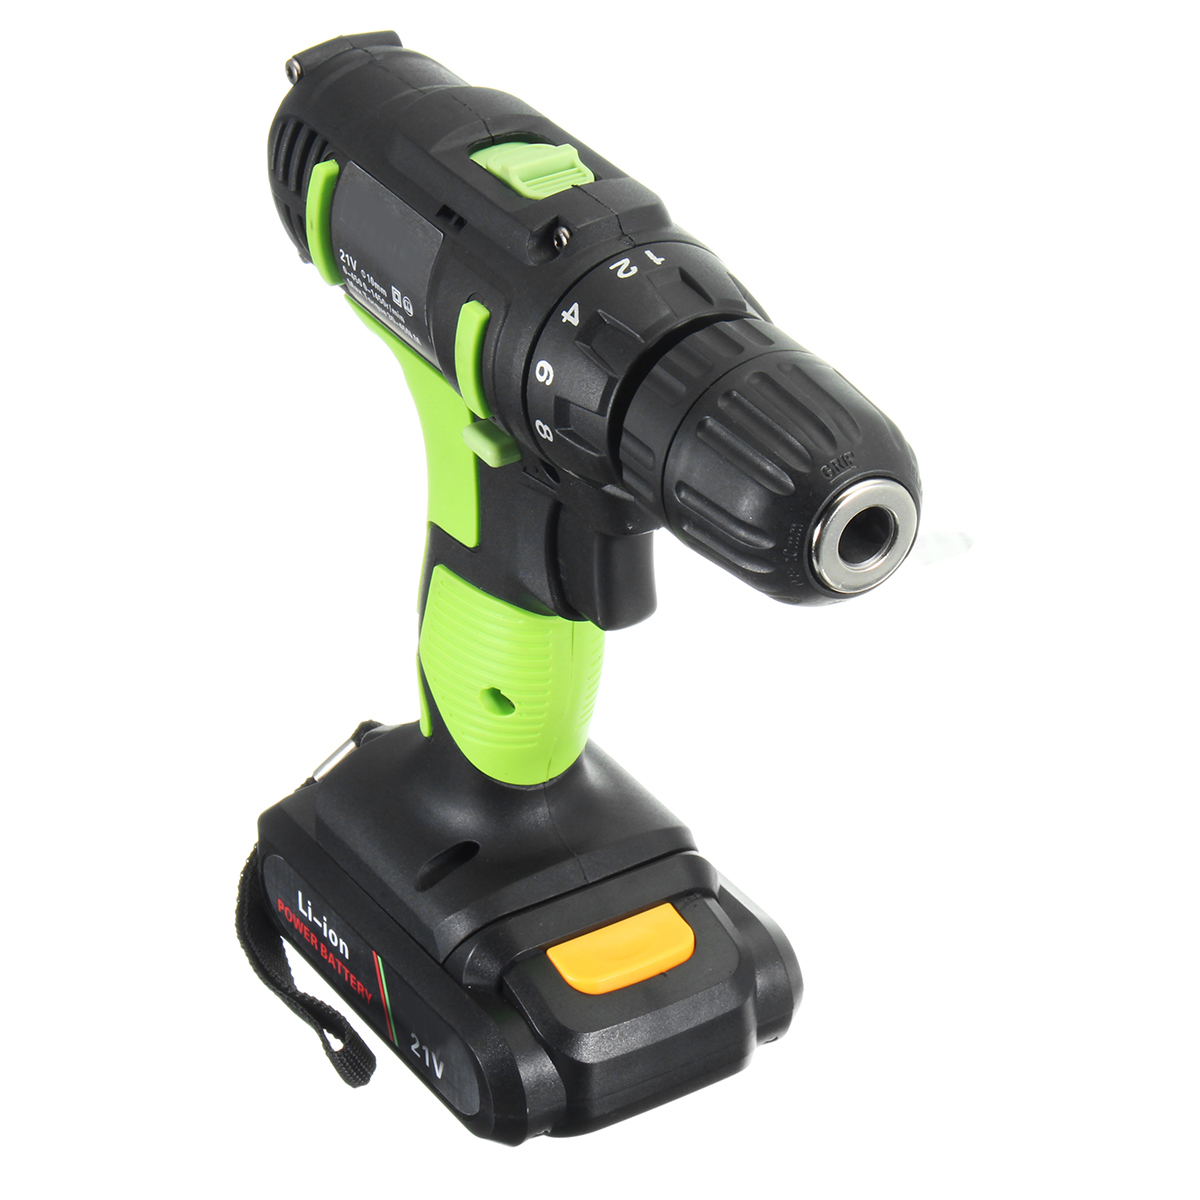 21V-Li-ion-Electric-Screwdriver-Rechargeable-Electric-Charging-Power-Drill-Two-Speed-30-45Nm-1256491-7